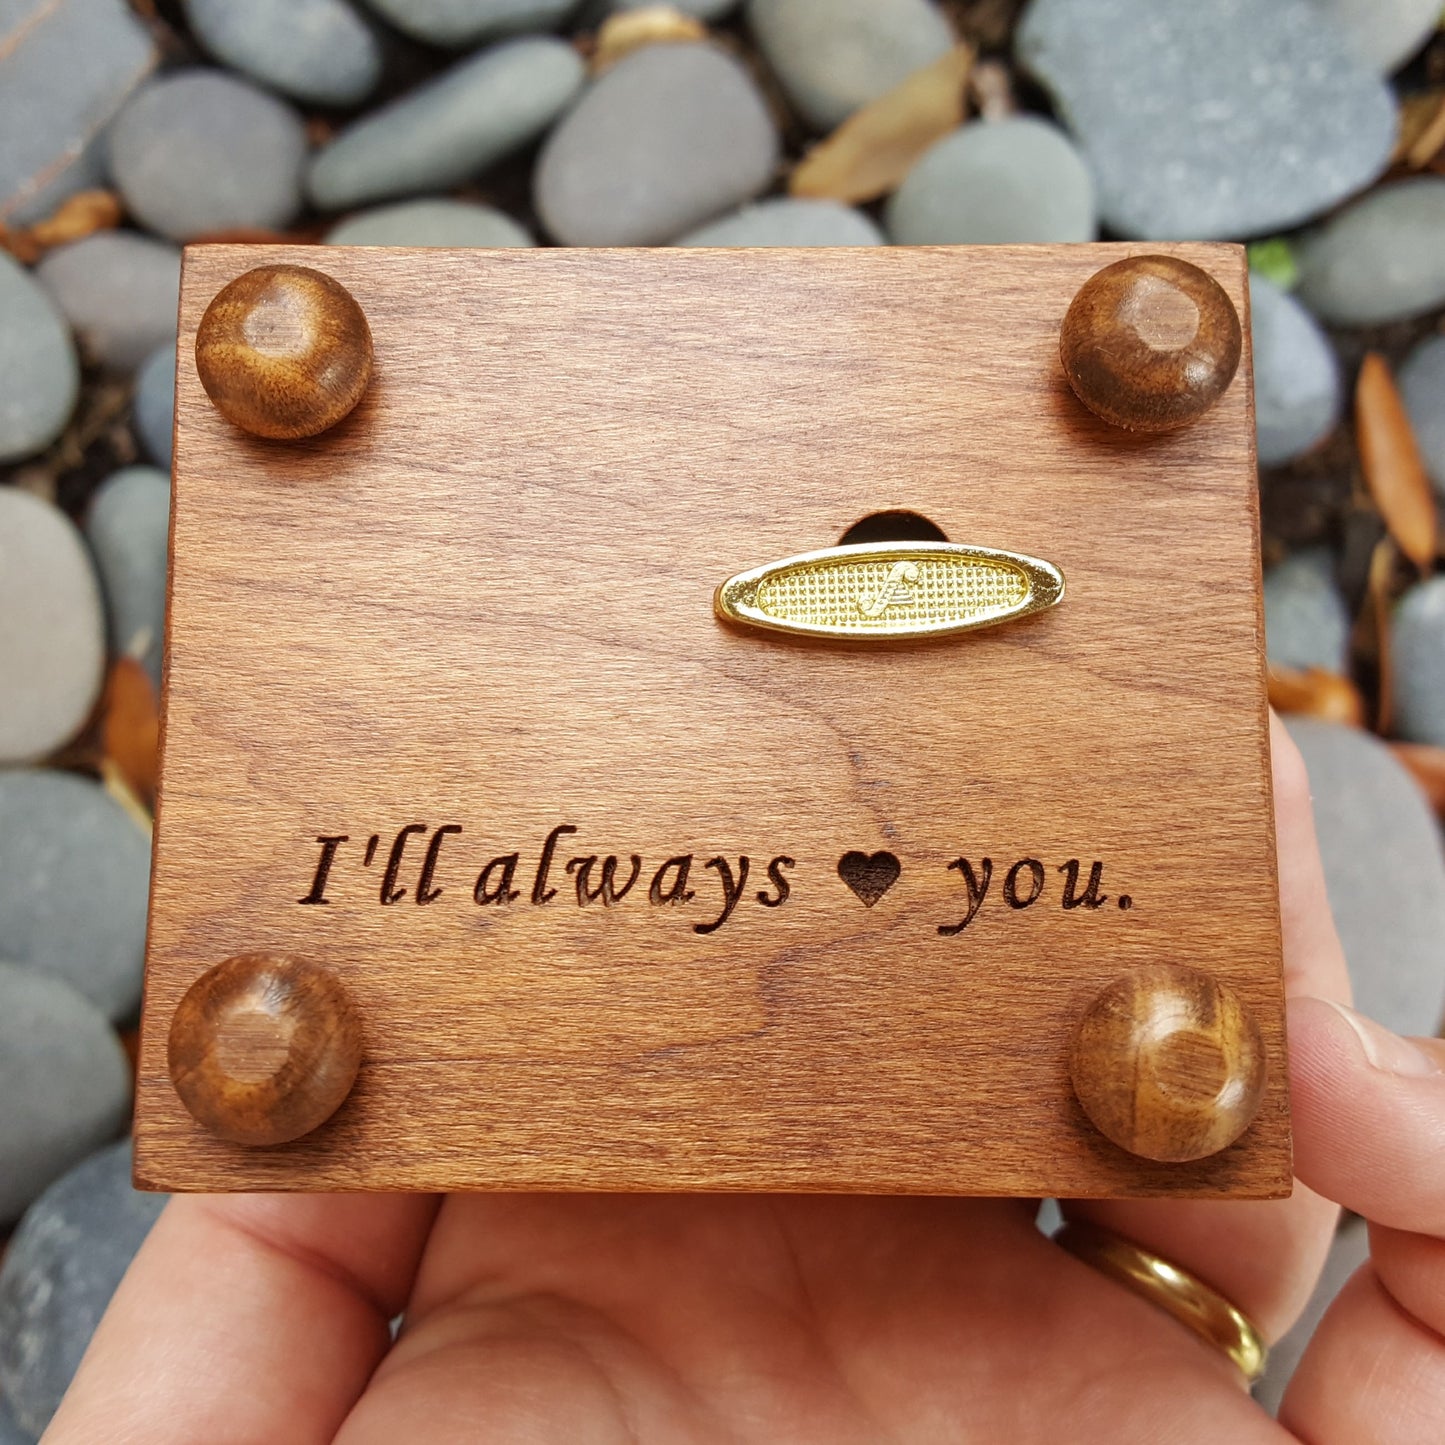 music box personalized engravings on the bottom side, I will always love you